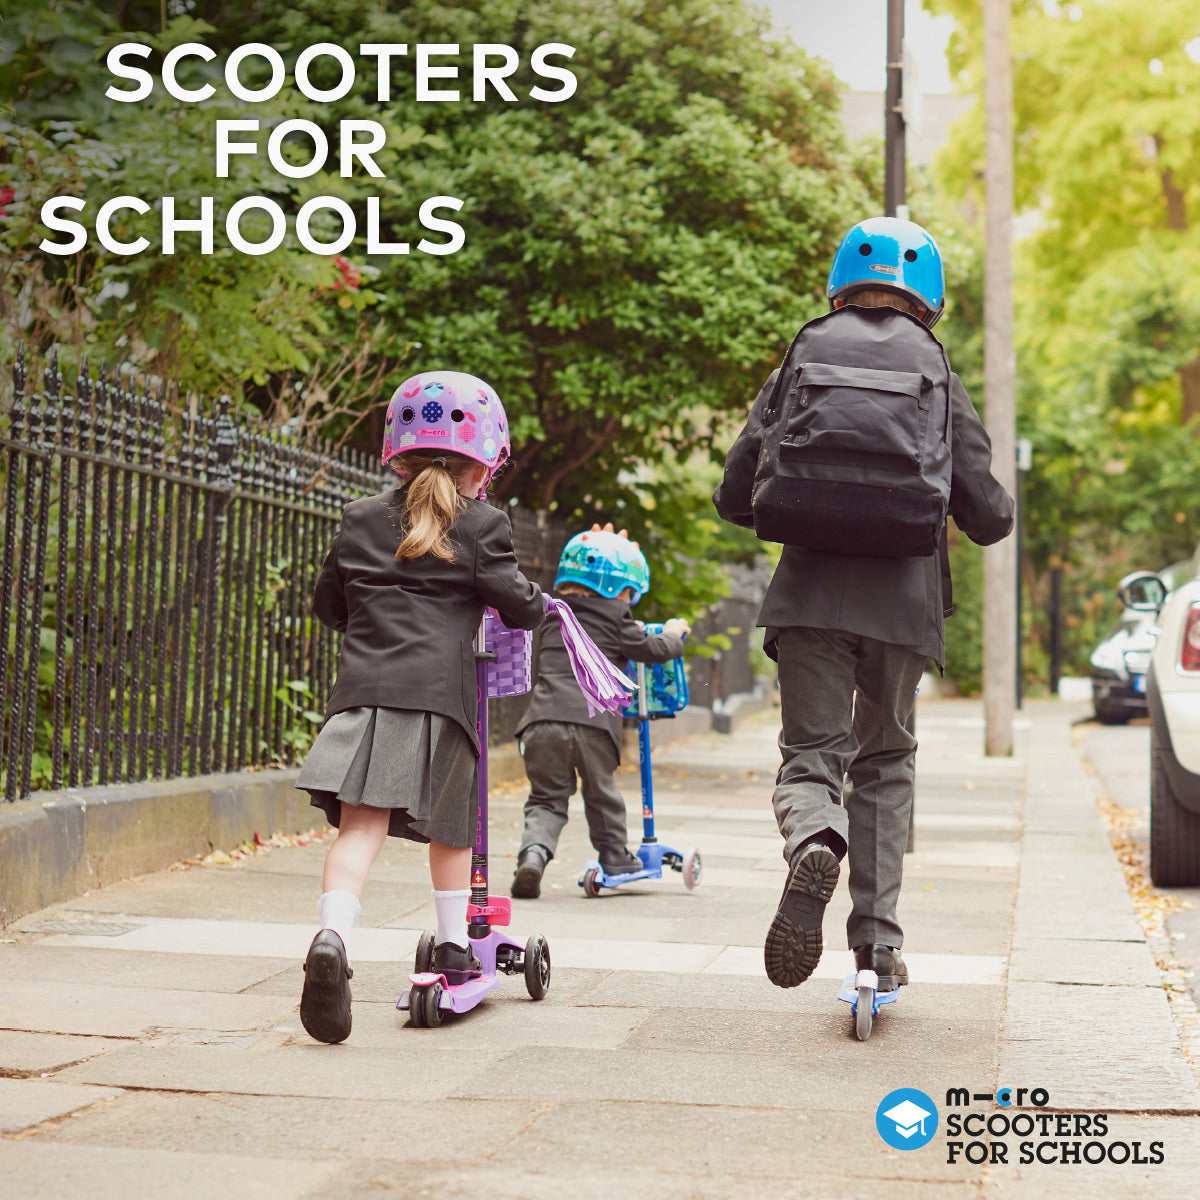 MICRO SCOOTERS FOR SCHOOLS